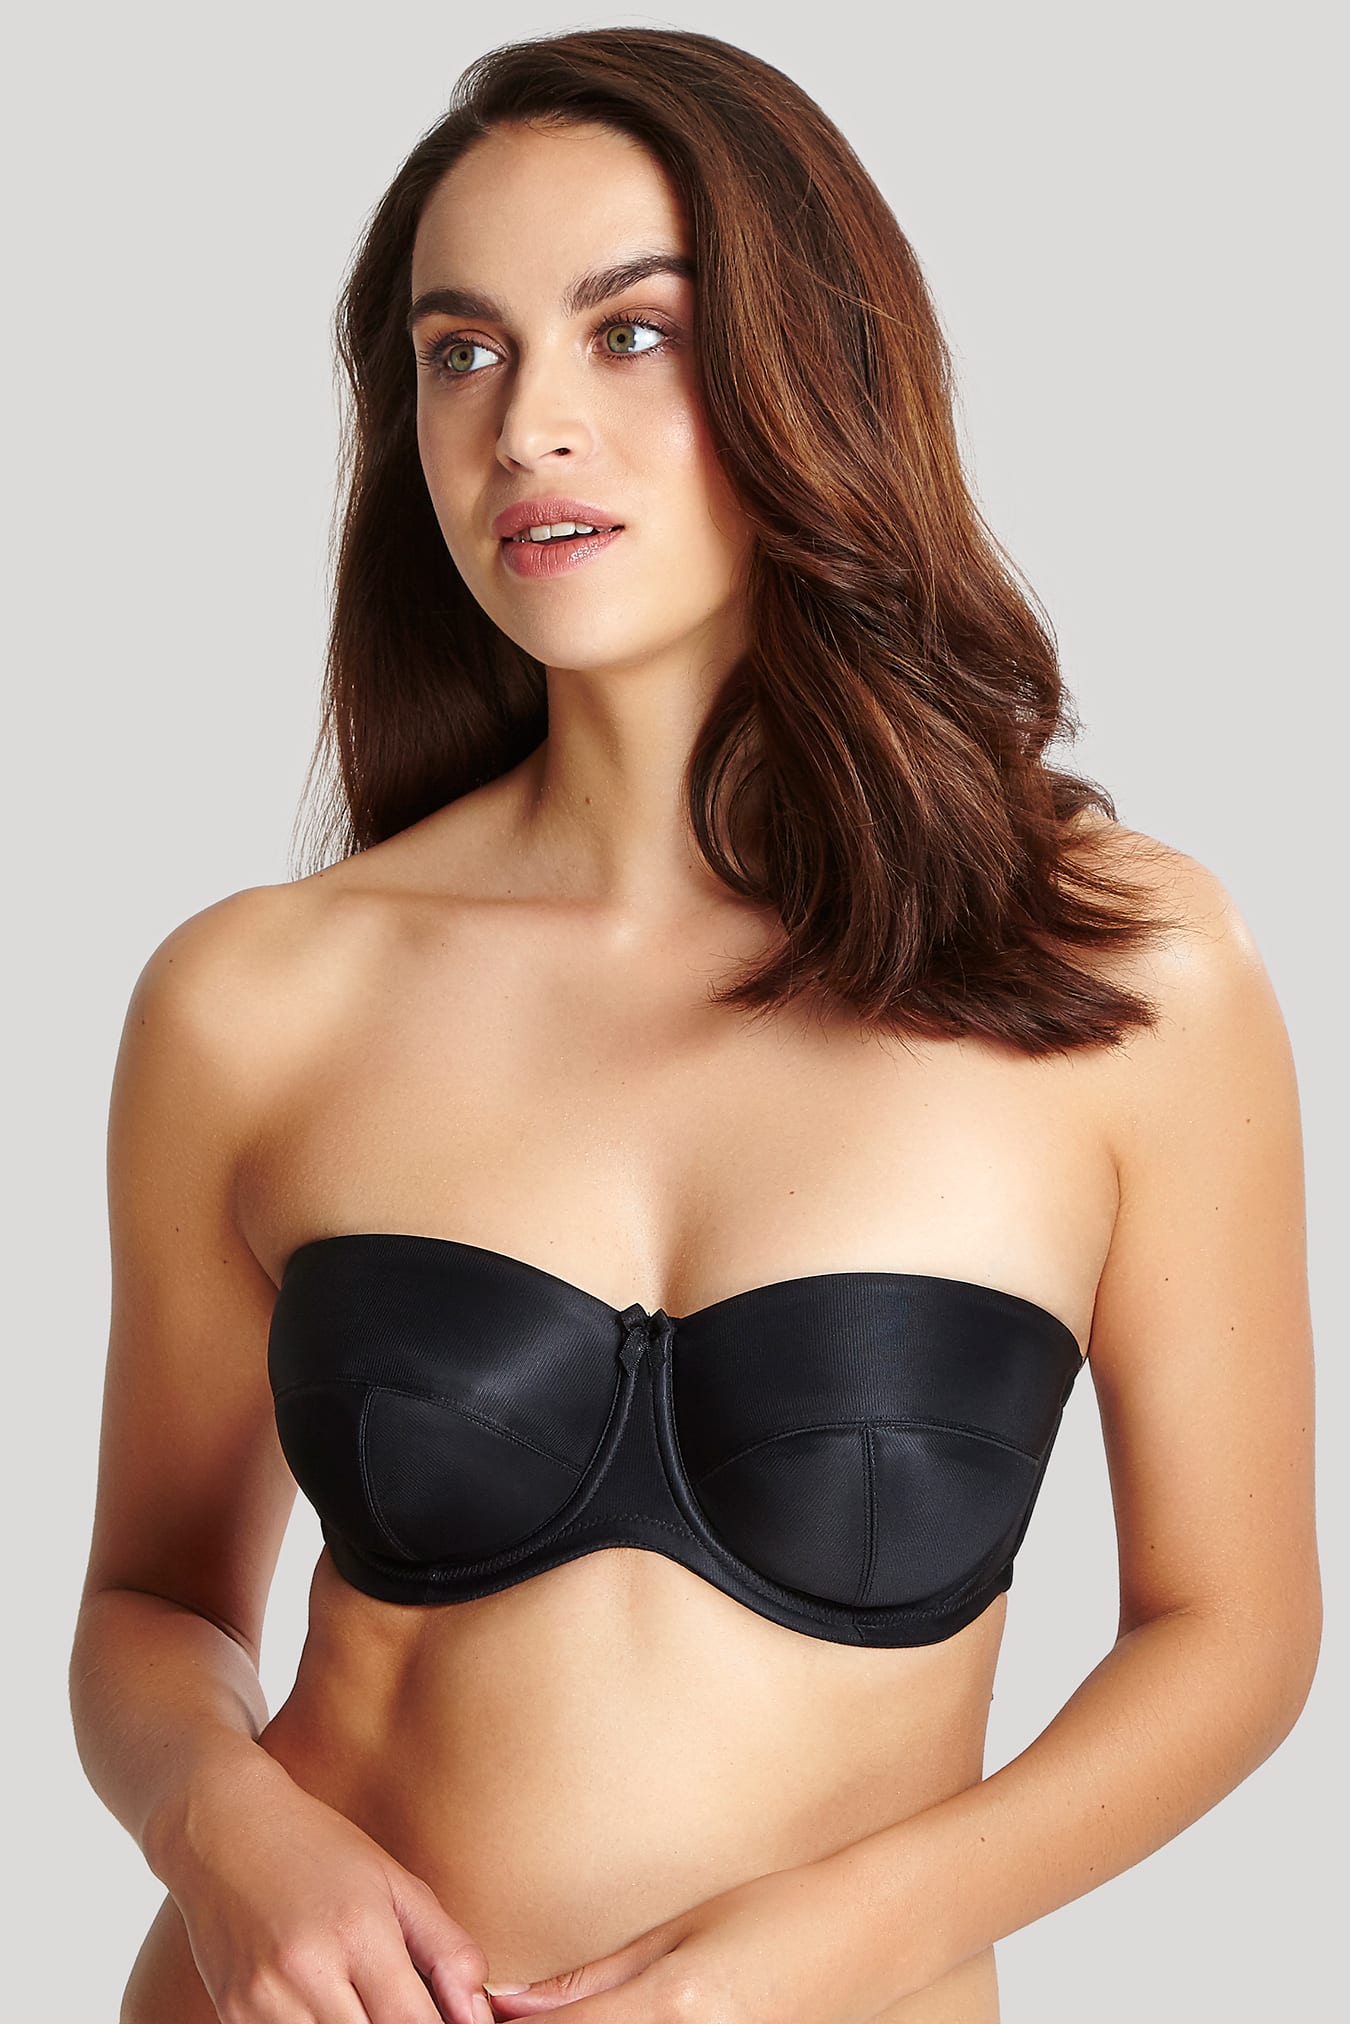 S1 Strapless Bra Underwires Sizes 30-58 By The Pair - The BraMakery